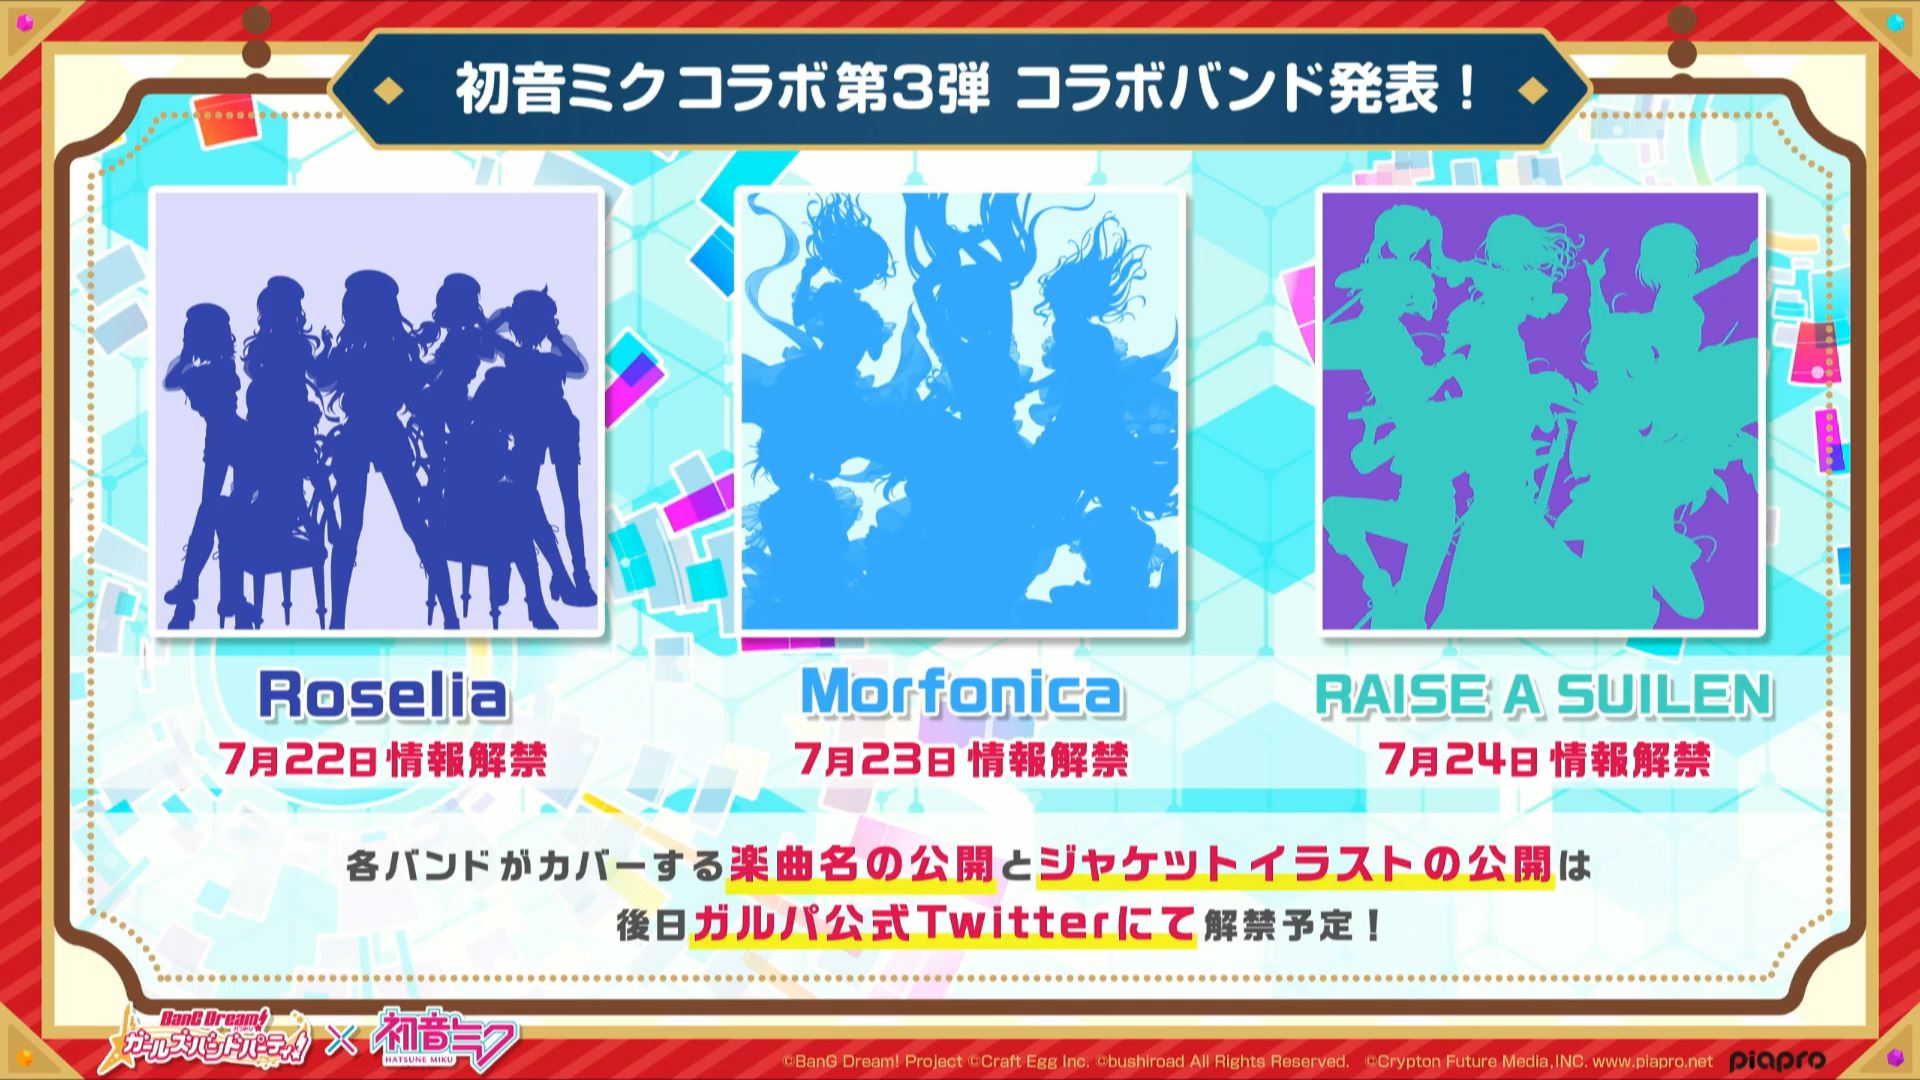 Bang Dream Updates There Ll Be A 3rd Hatsune Miku Collab For Gbp Jp Roselia Morfonica And Ras Will Be The Featured Bands There Ll Be Collab Mvs In Game As Well T Co Dzzpwrjnnj